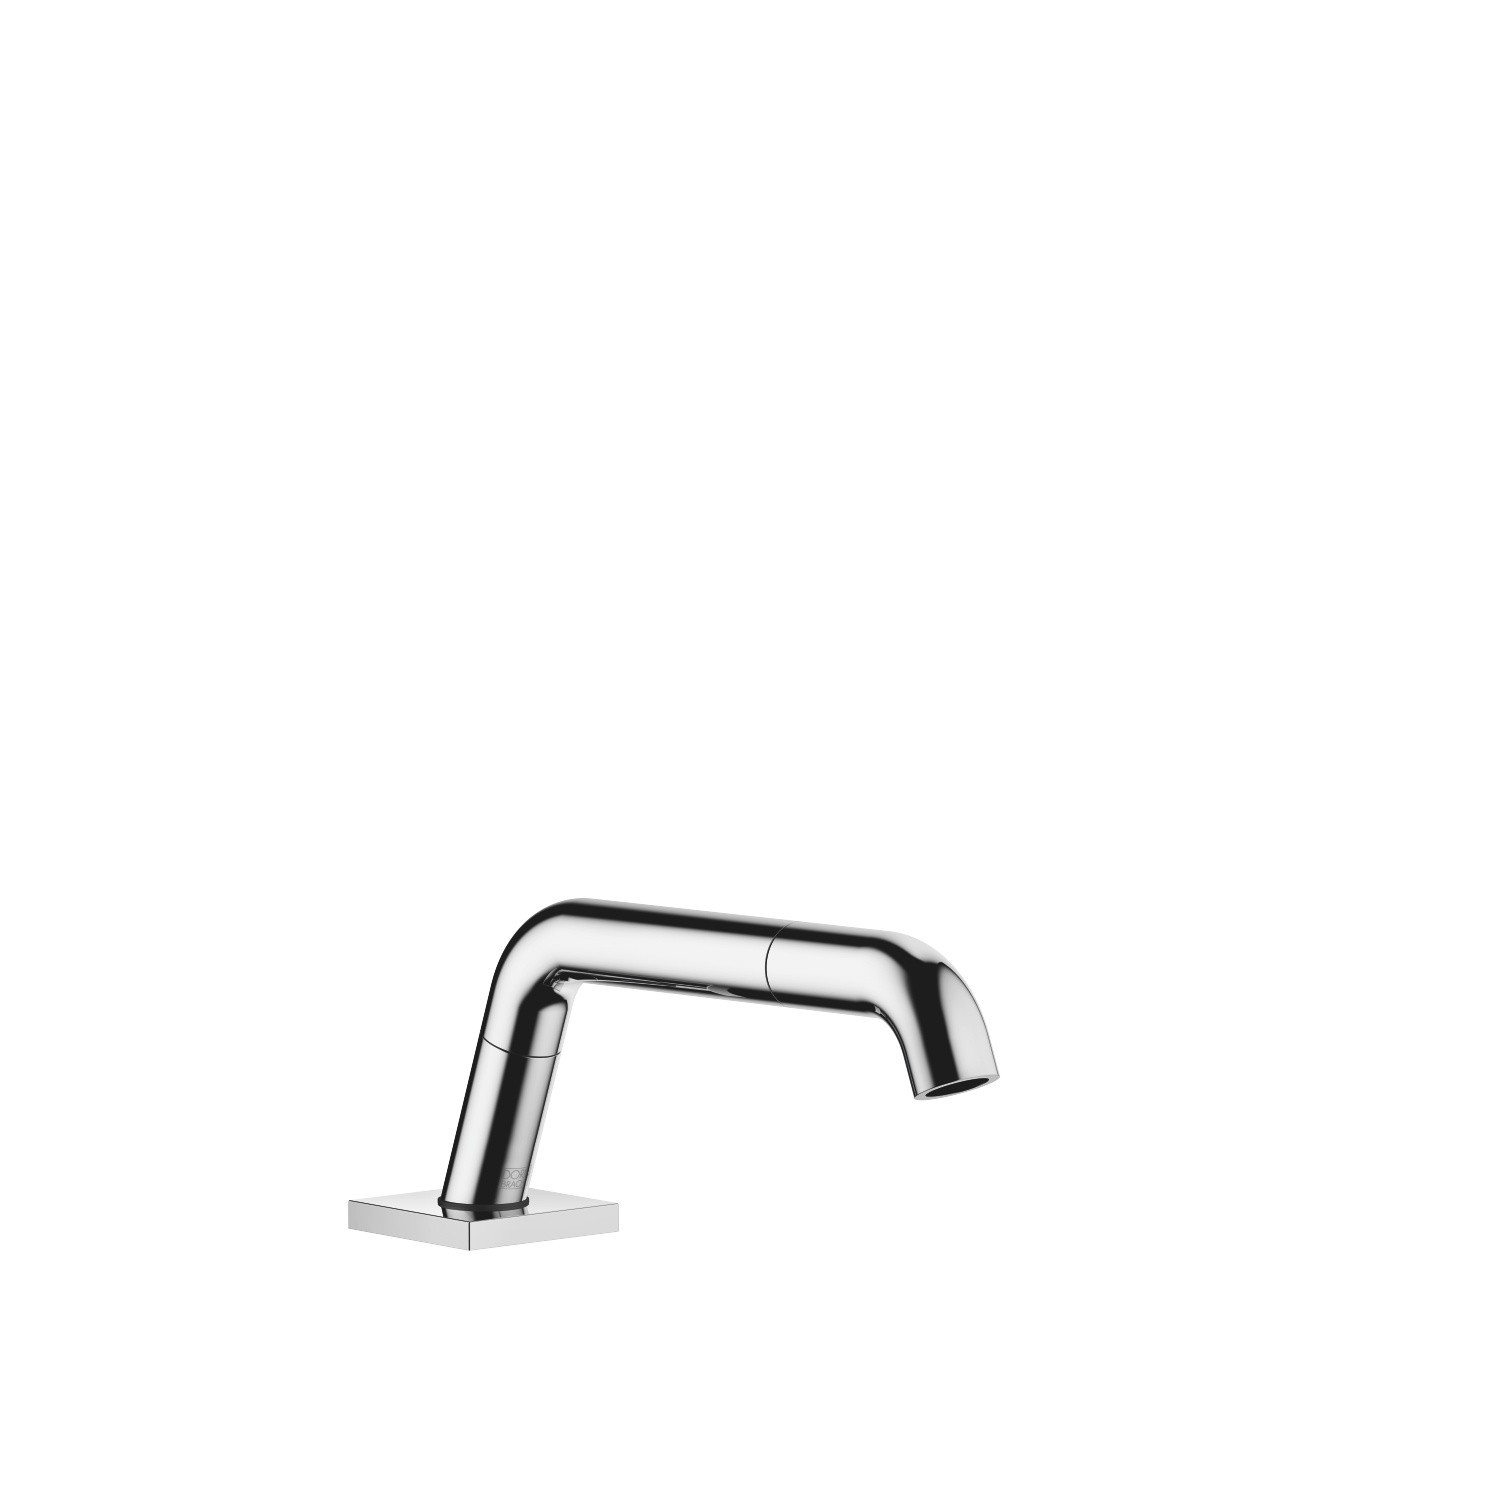 DORNBRACHT 27738972-0010 1.8 GPM SQUARE FLANGE DECK MOUNT AFFUSION PIPE HAND SHOWER FOR KNEIPP TREATMENTS